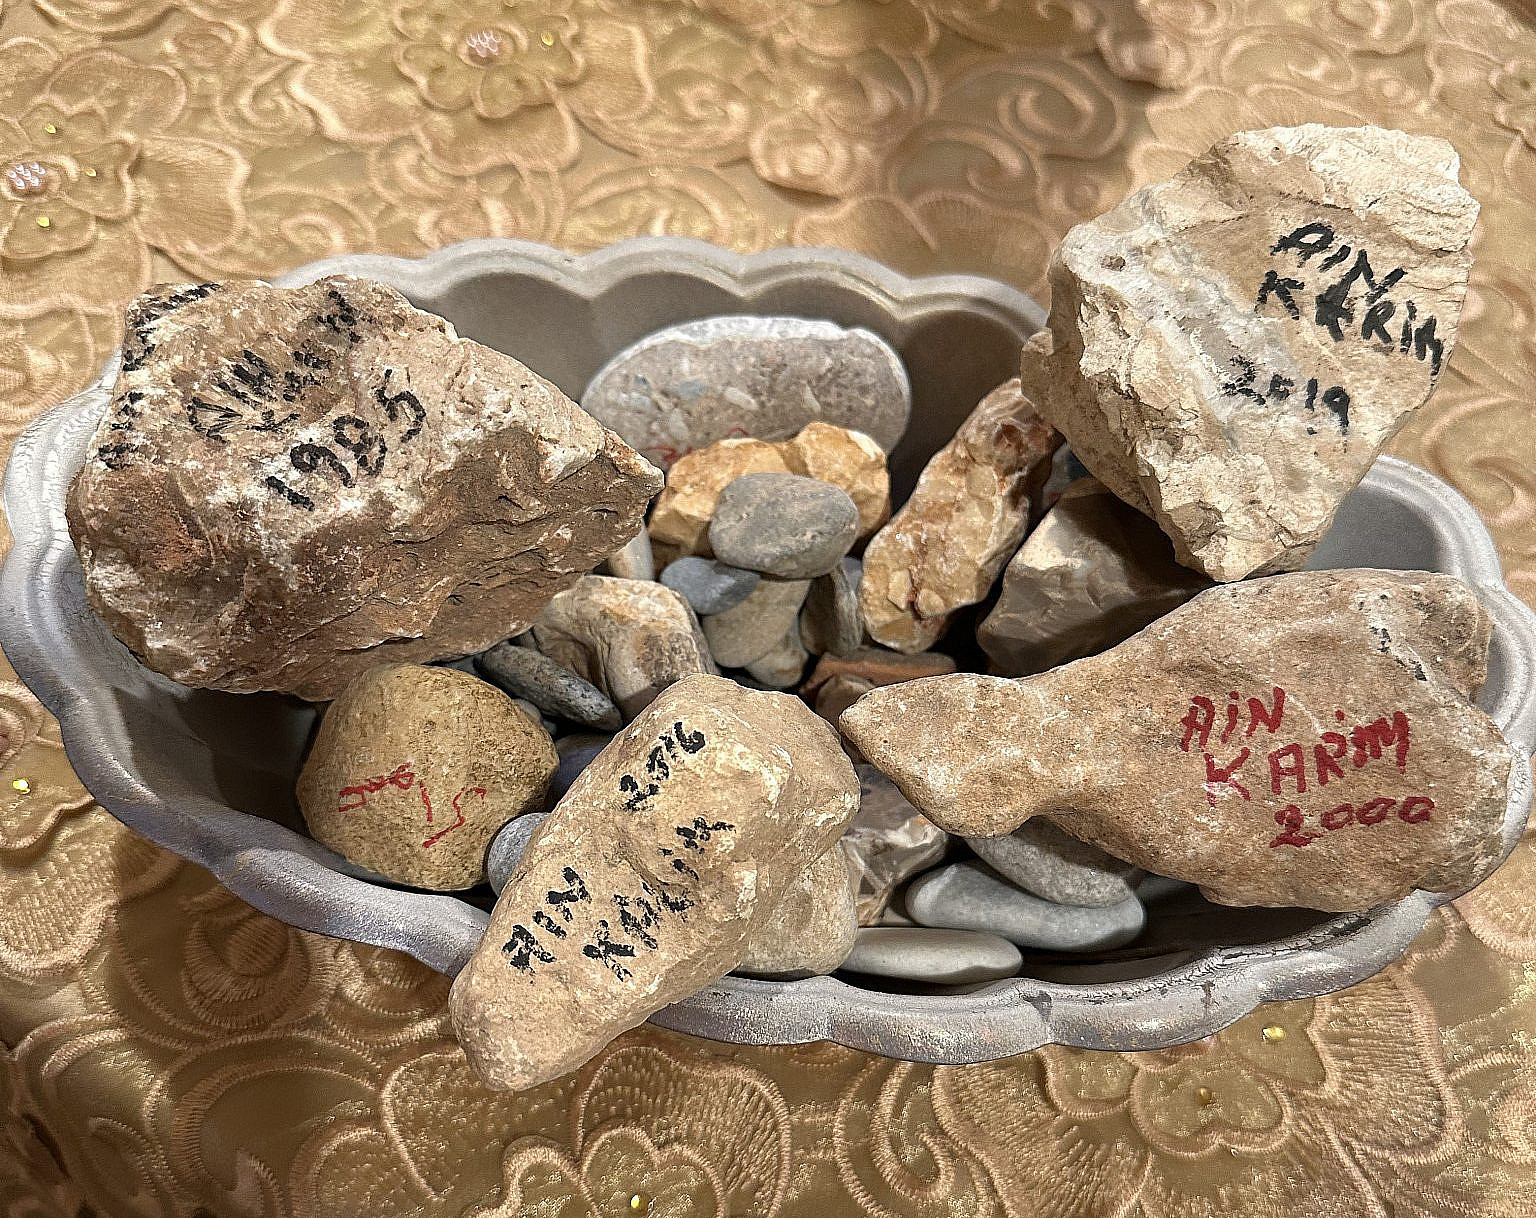 Stones collected by Leila Giries from her uprooted village of Ain Karem, on which she wrote the name and years of her visits. (Courtesy)